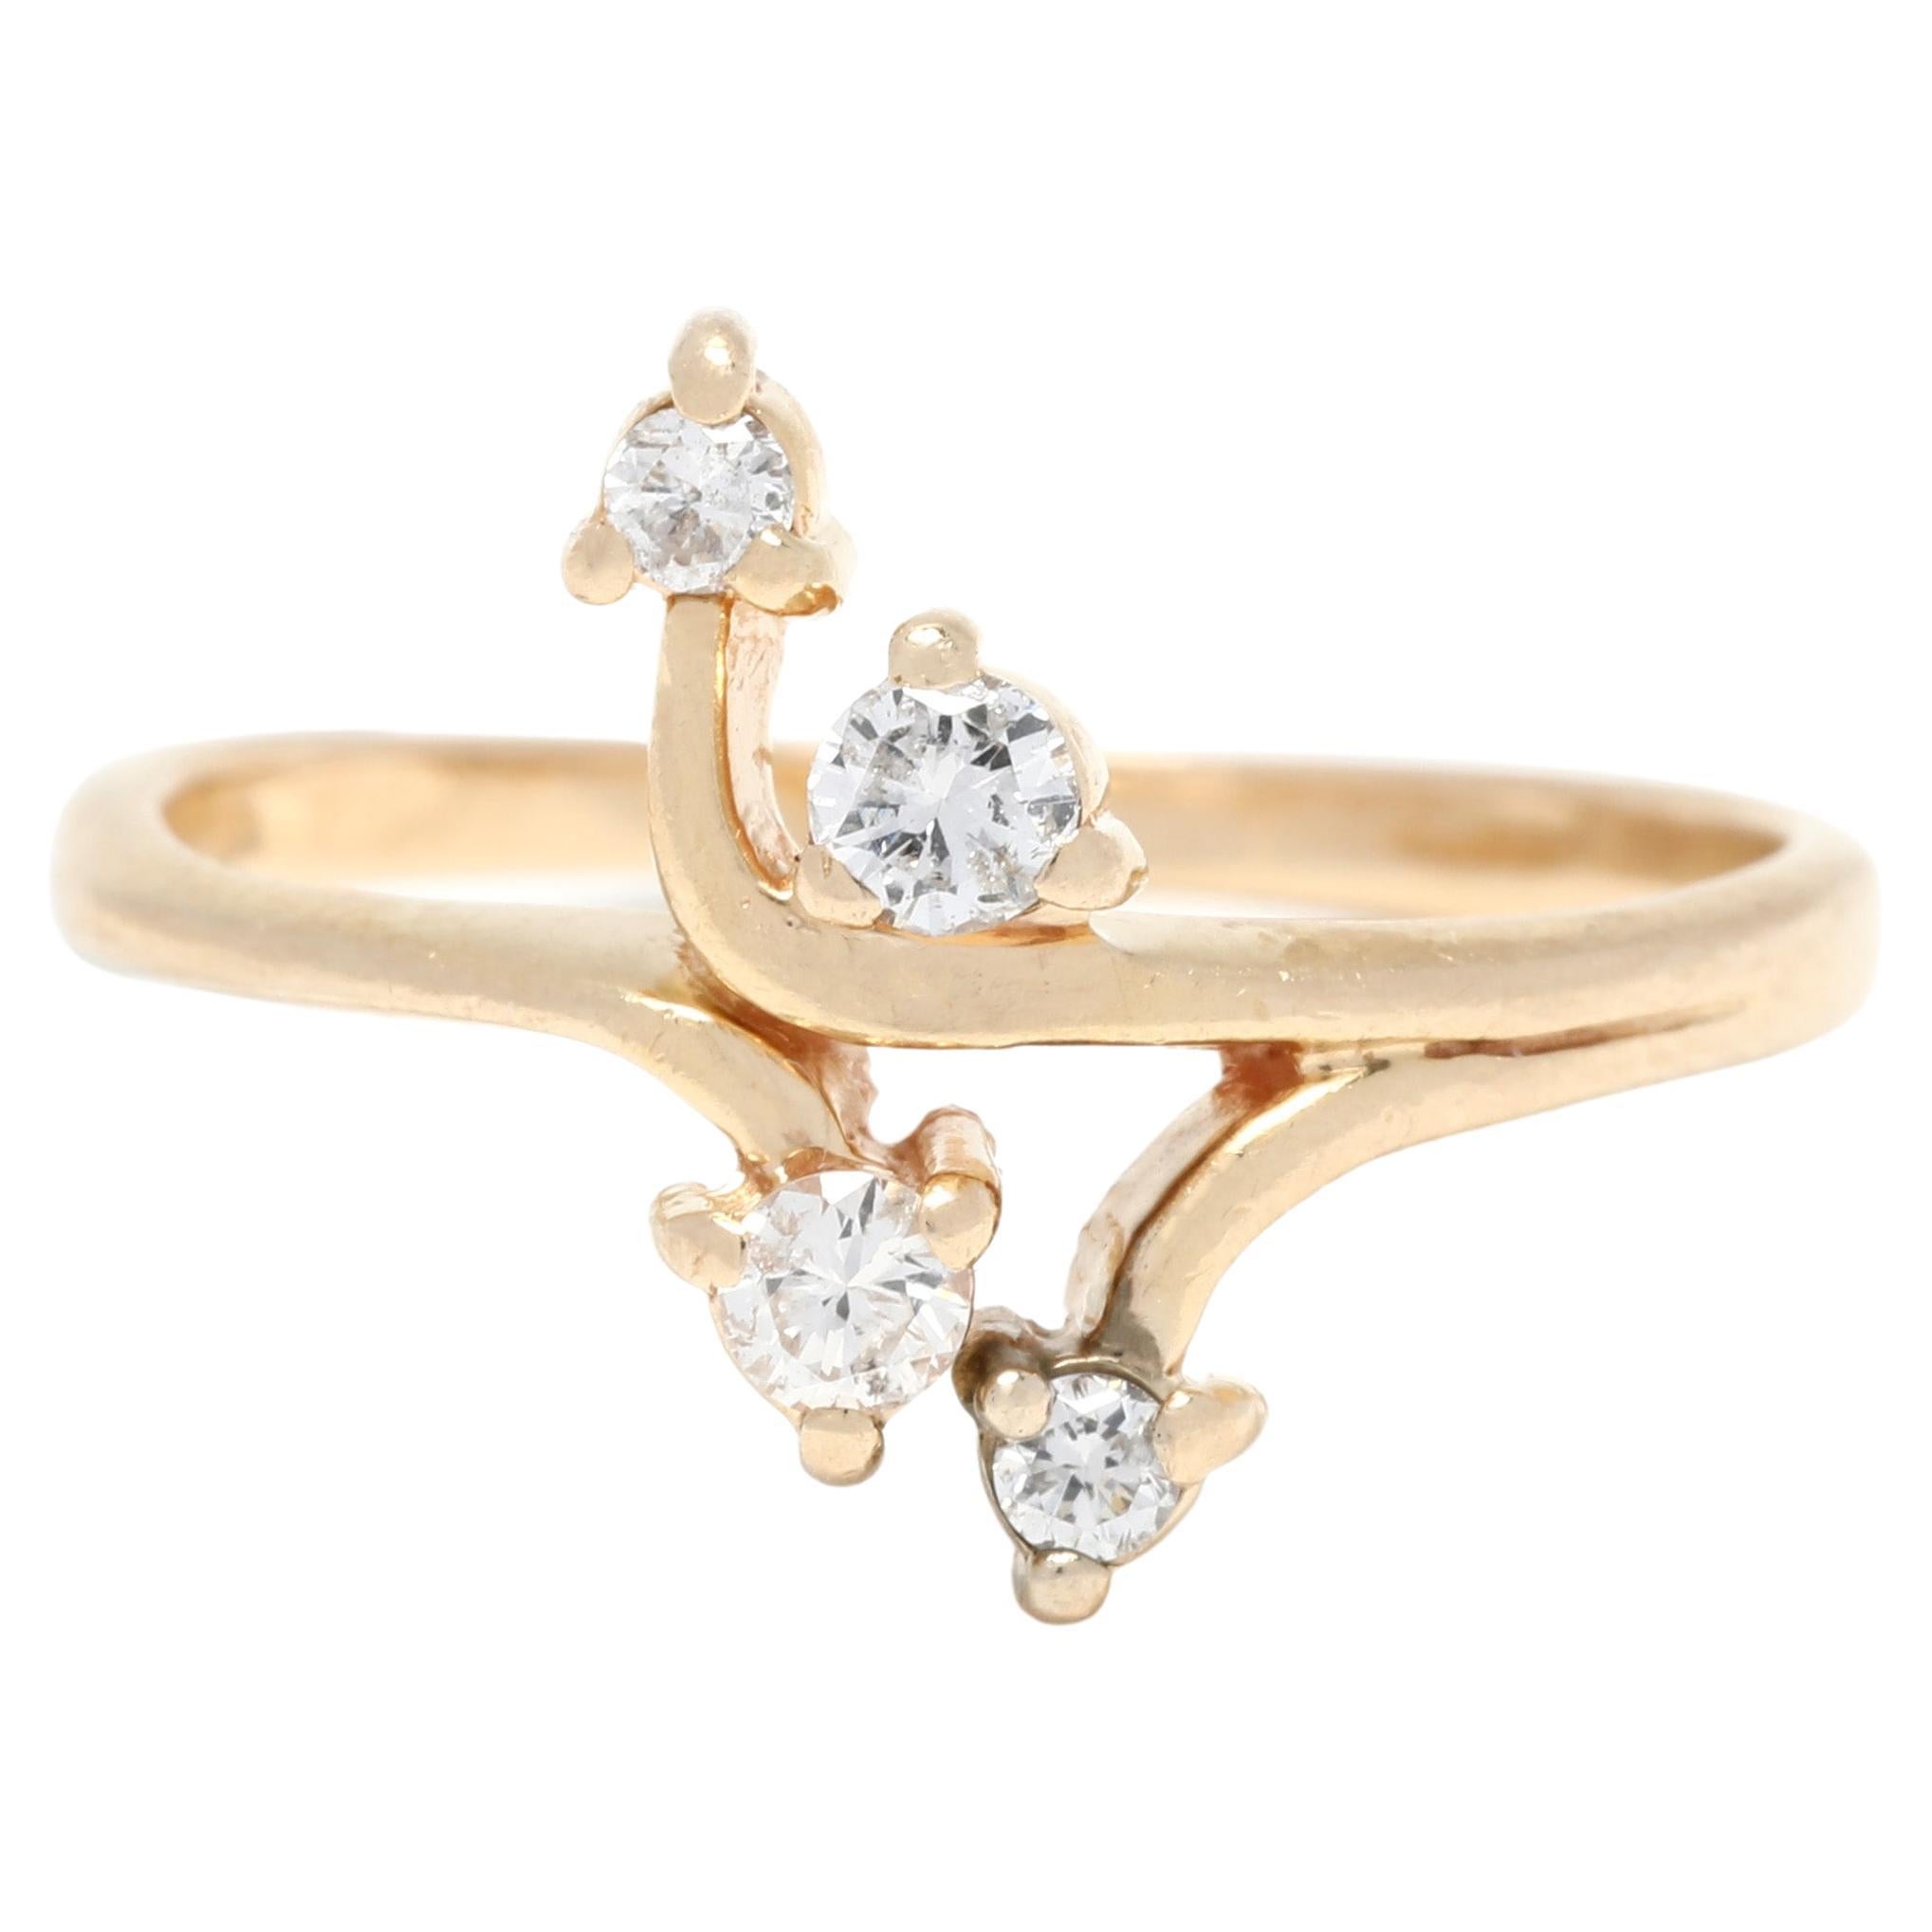 Diamond Bypass Ring, 14K Yellow Gold, Ring Size 6.75, Diamond Cluster Ring For Sale